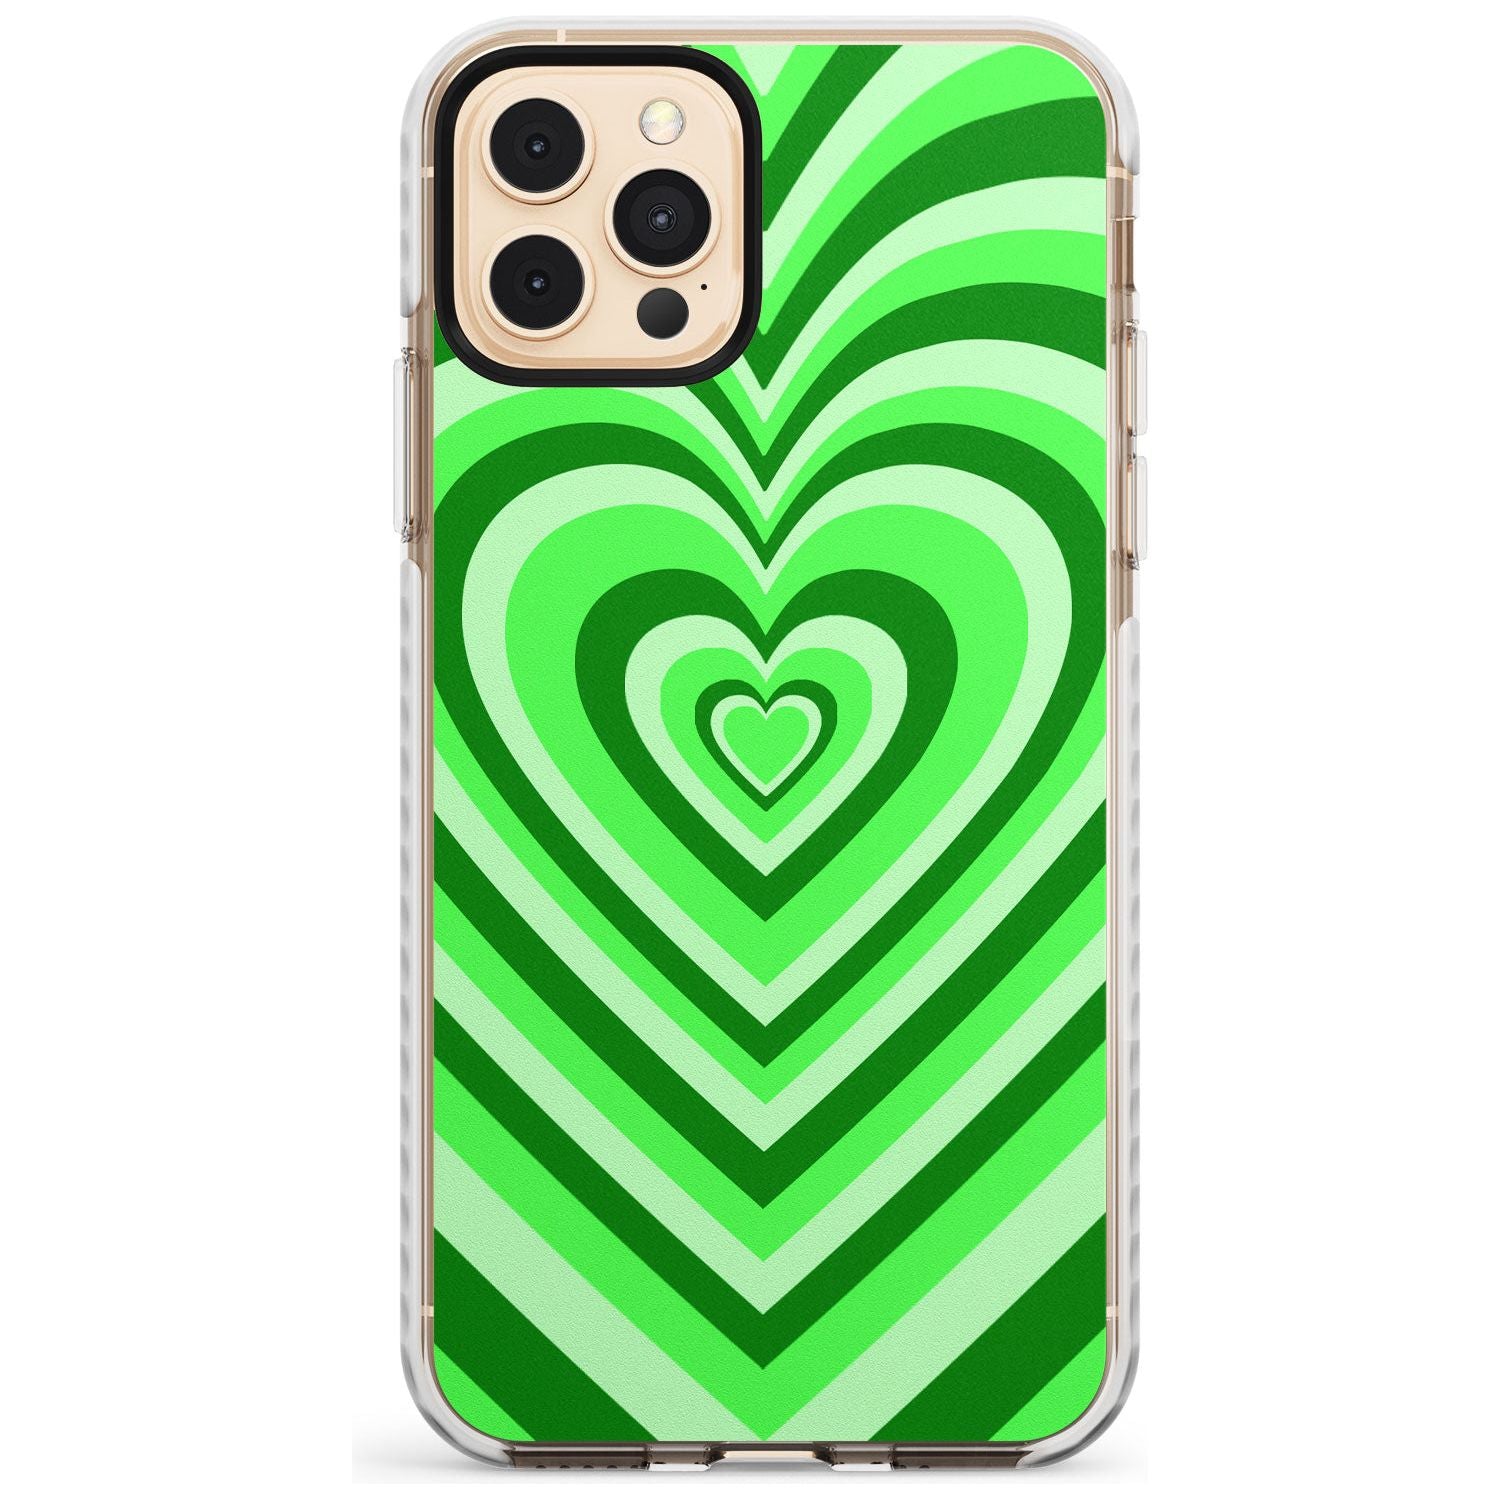 Green Heart Illusion Impact Phone Case for iPhone 11 Pro Max